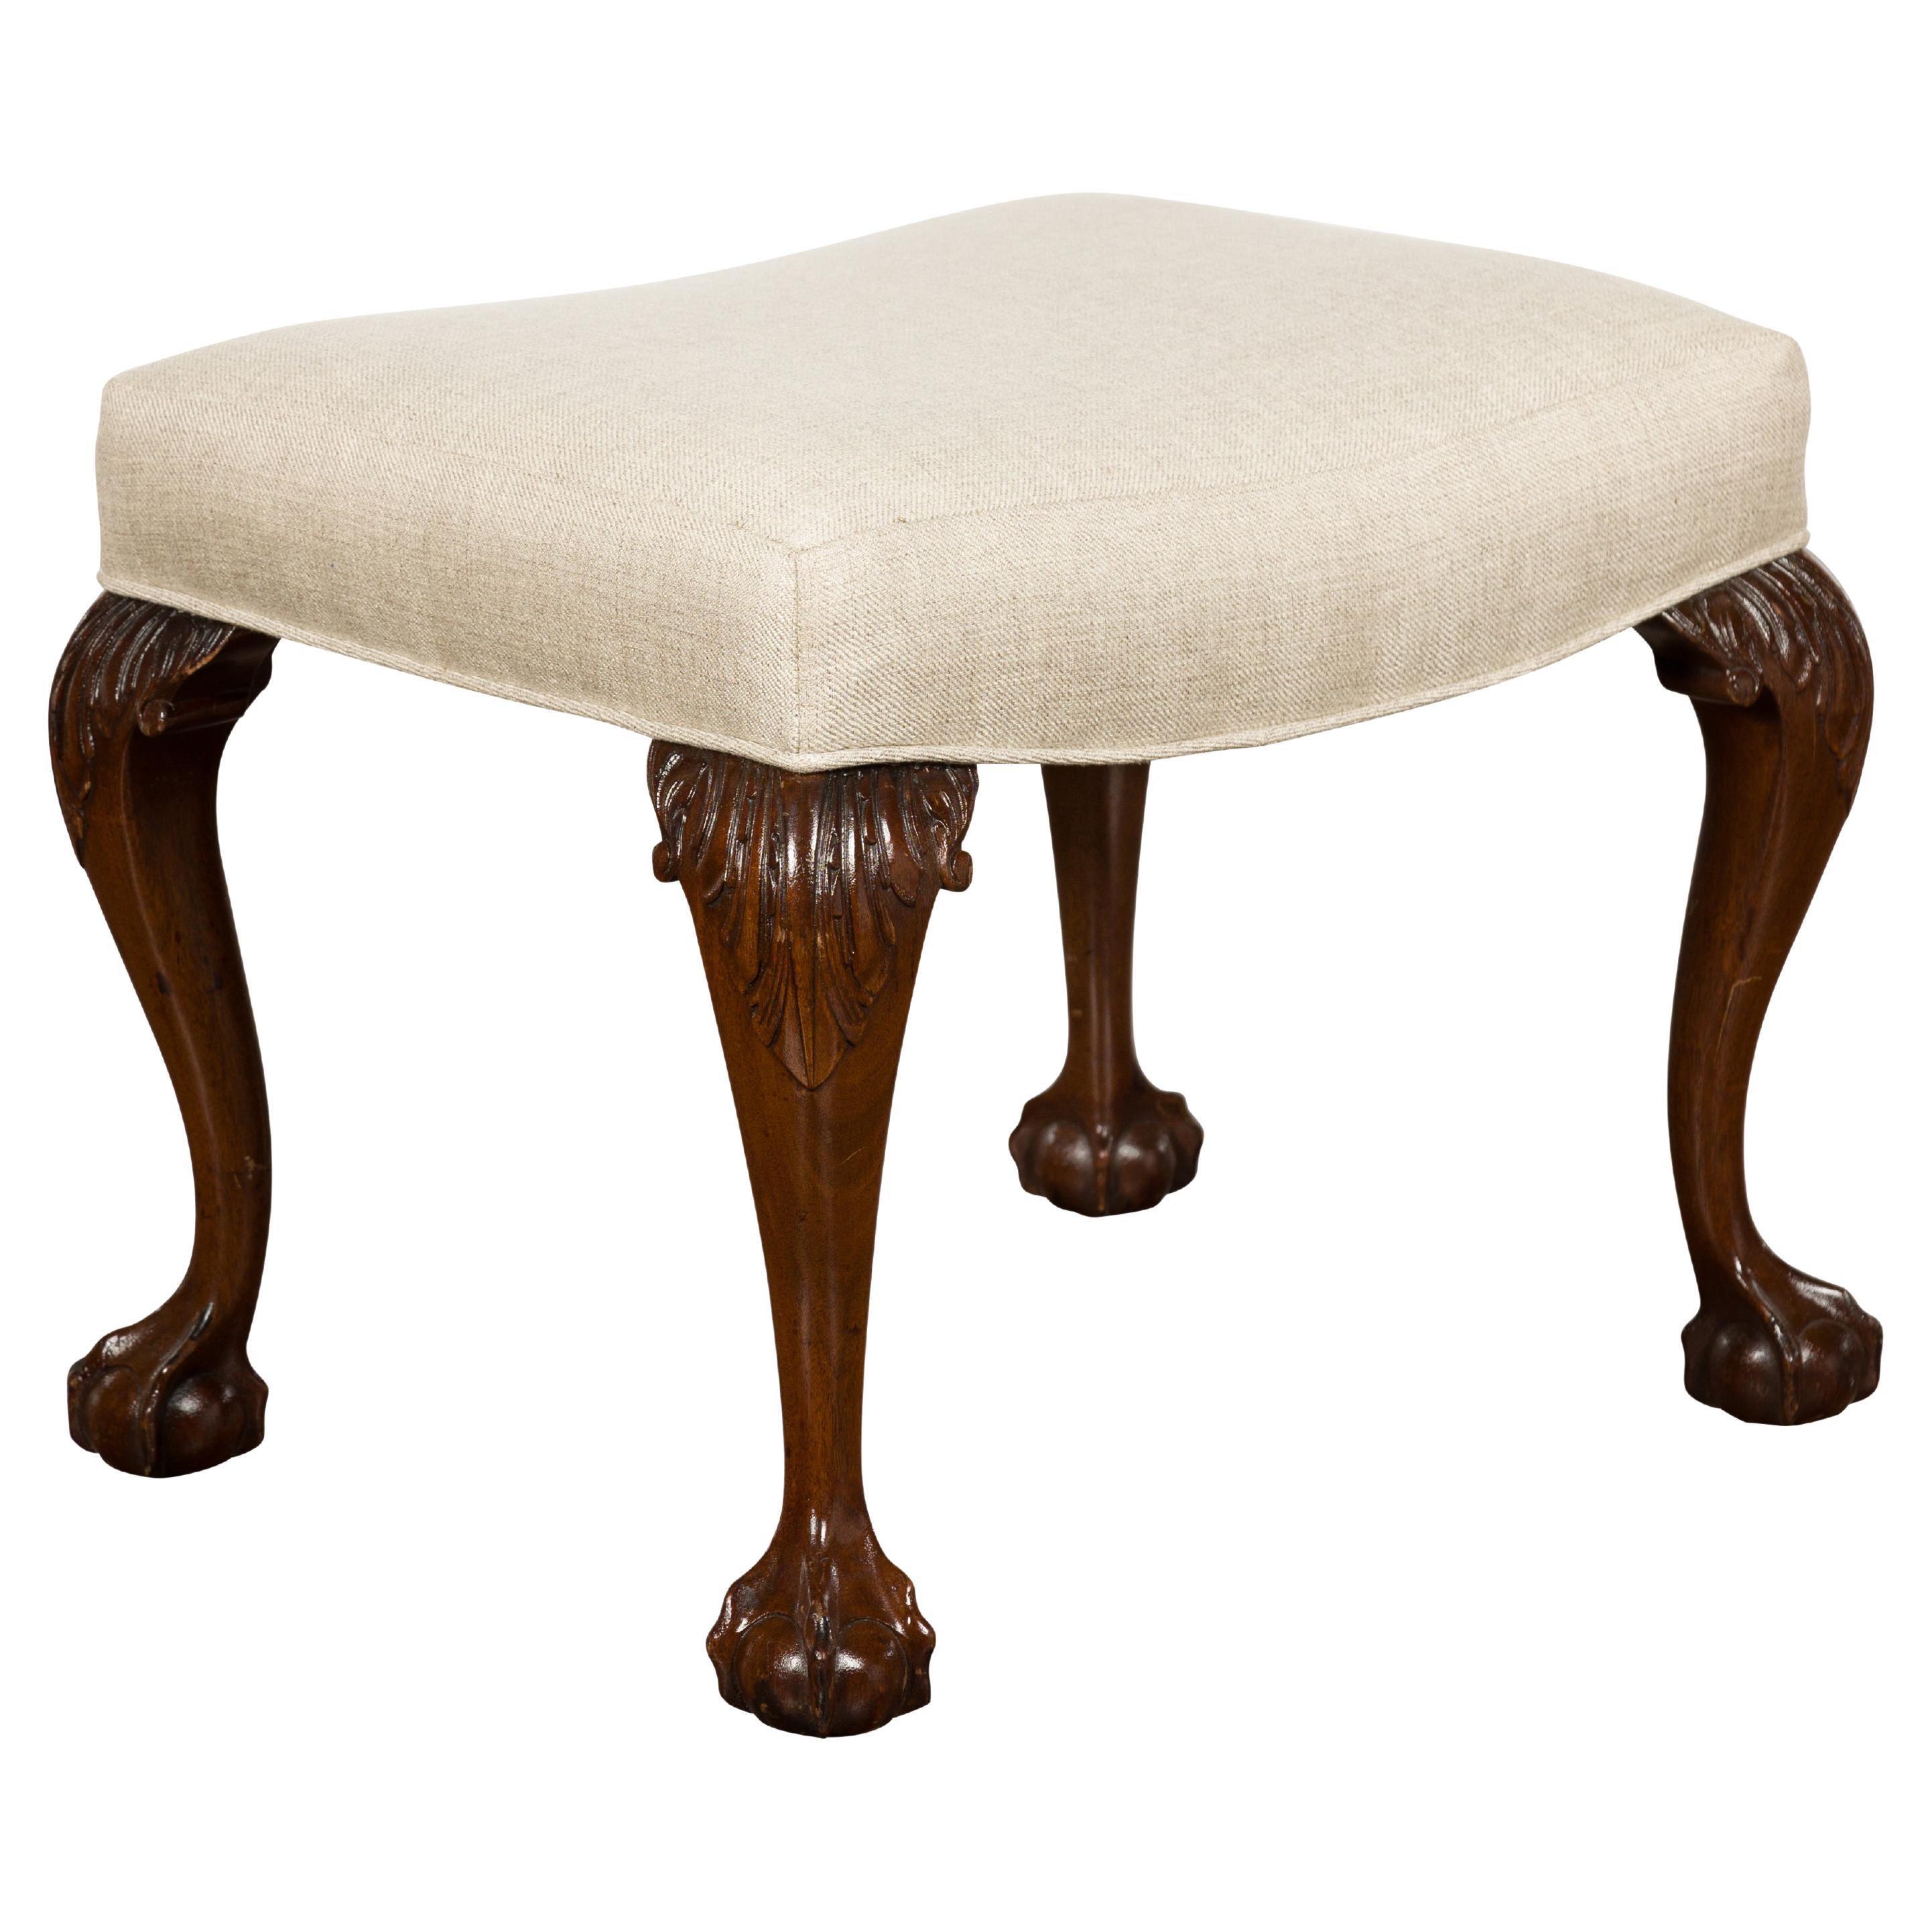 19th Century English Mahogany Upholstered Stool with Cabriole Legs For Sale